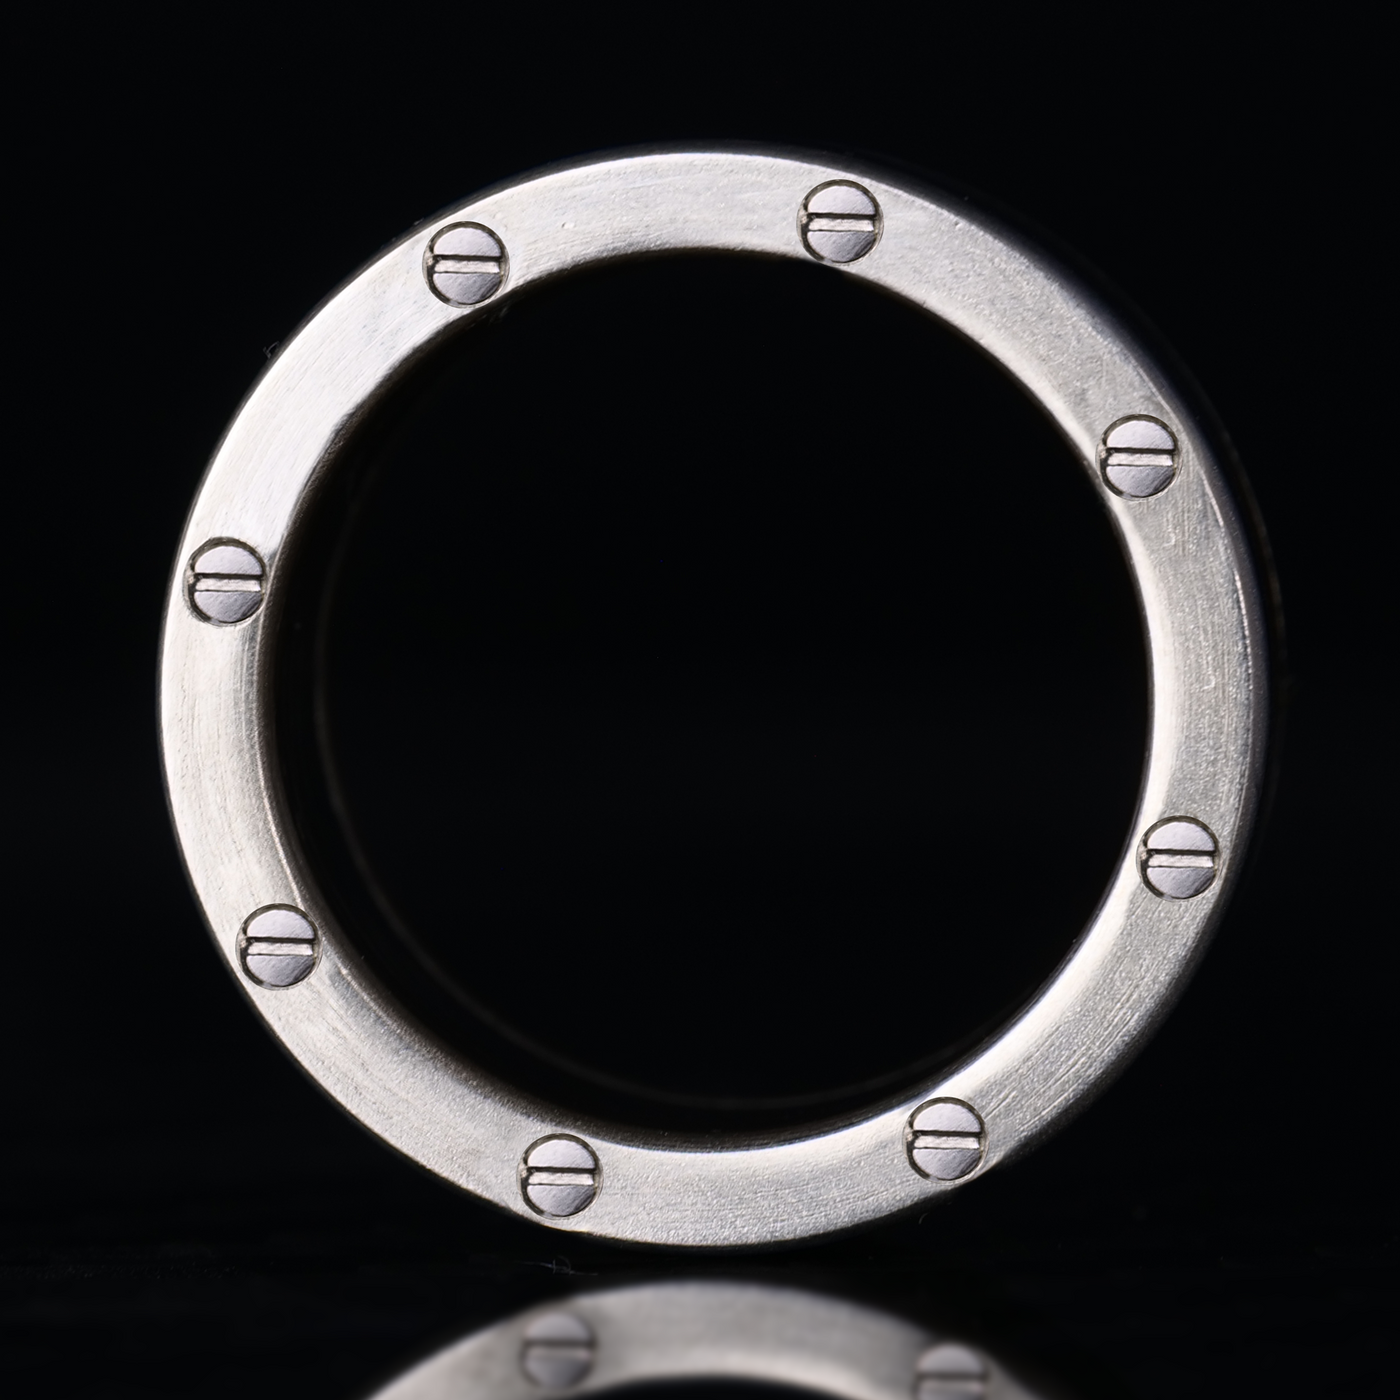 The Torque Ring | Carbon Fiber and Sterling Silver Ring - Patrick Adair Designs